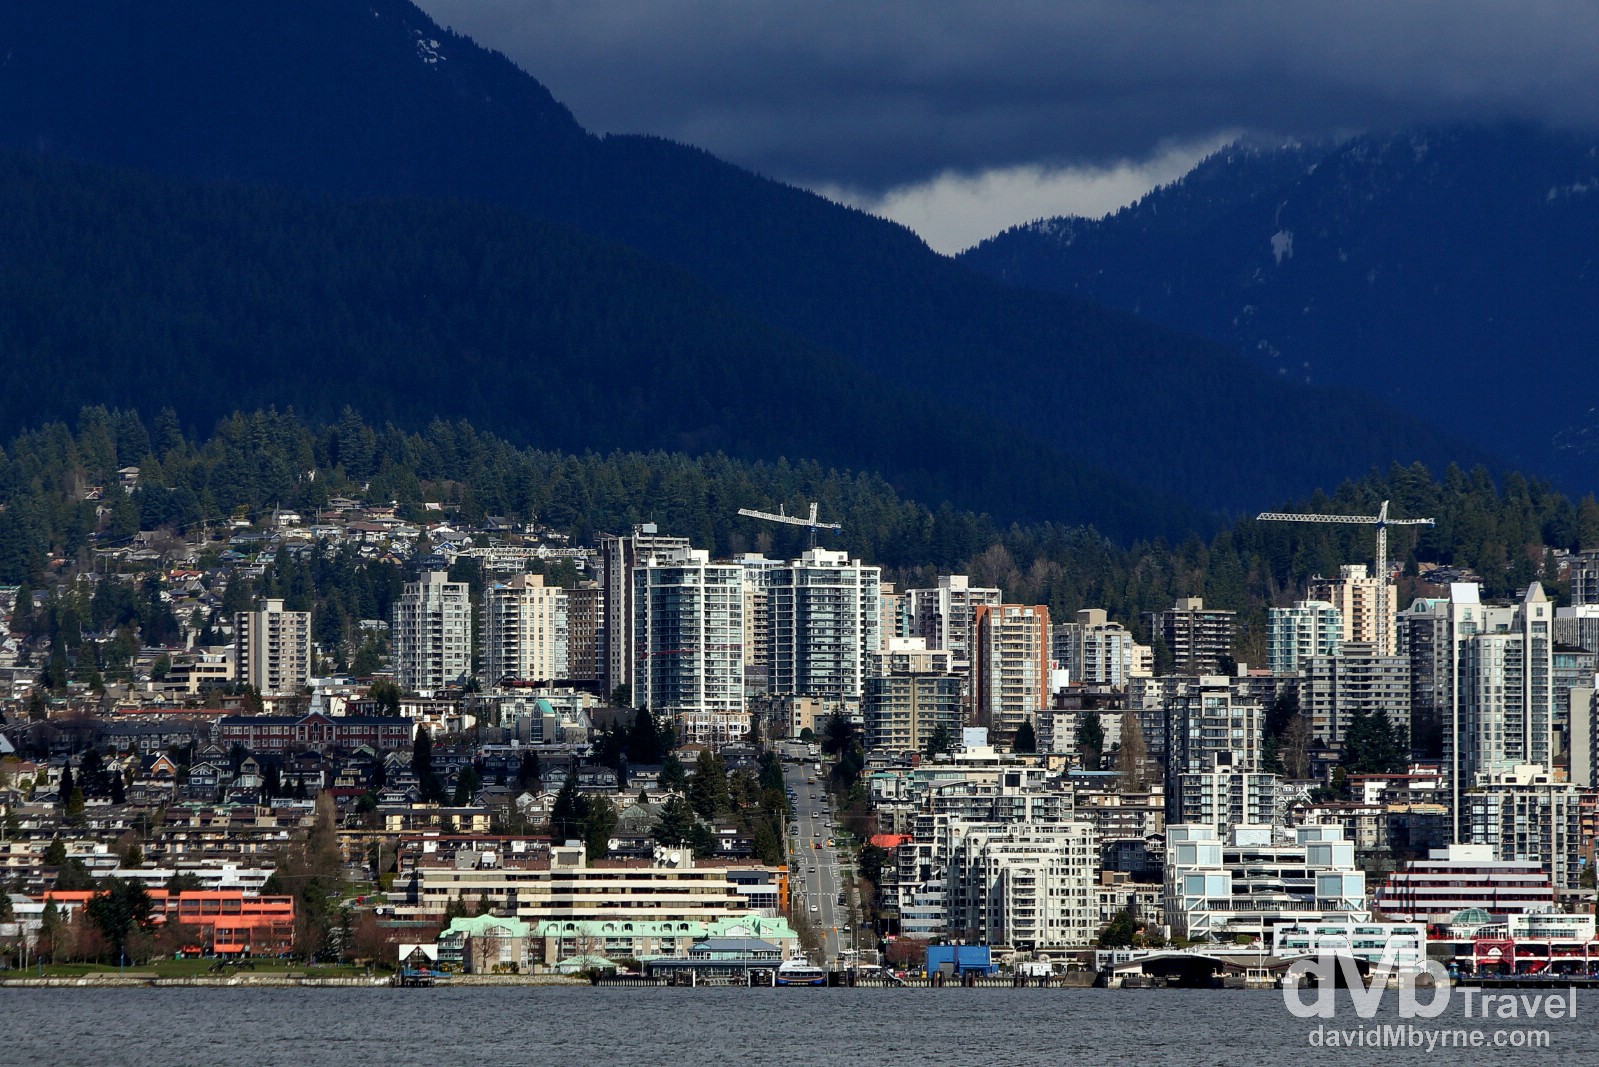 A picture of North Vancouver taken from the waters edge across Burrard Inlet in downtown Vancouver, British Columbia, Canada. March 20th 2013.